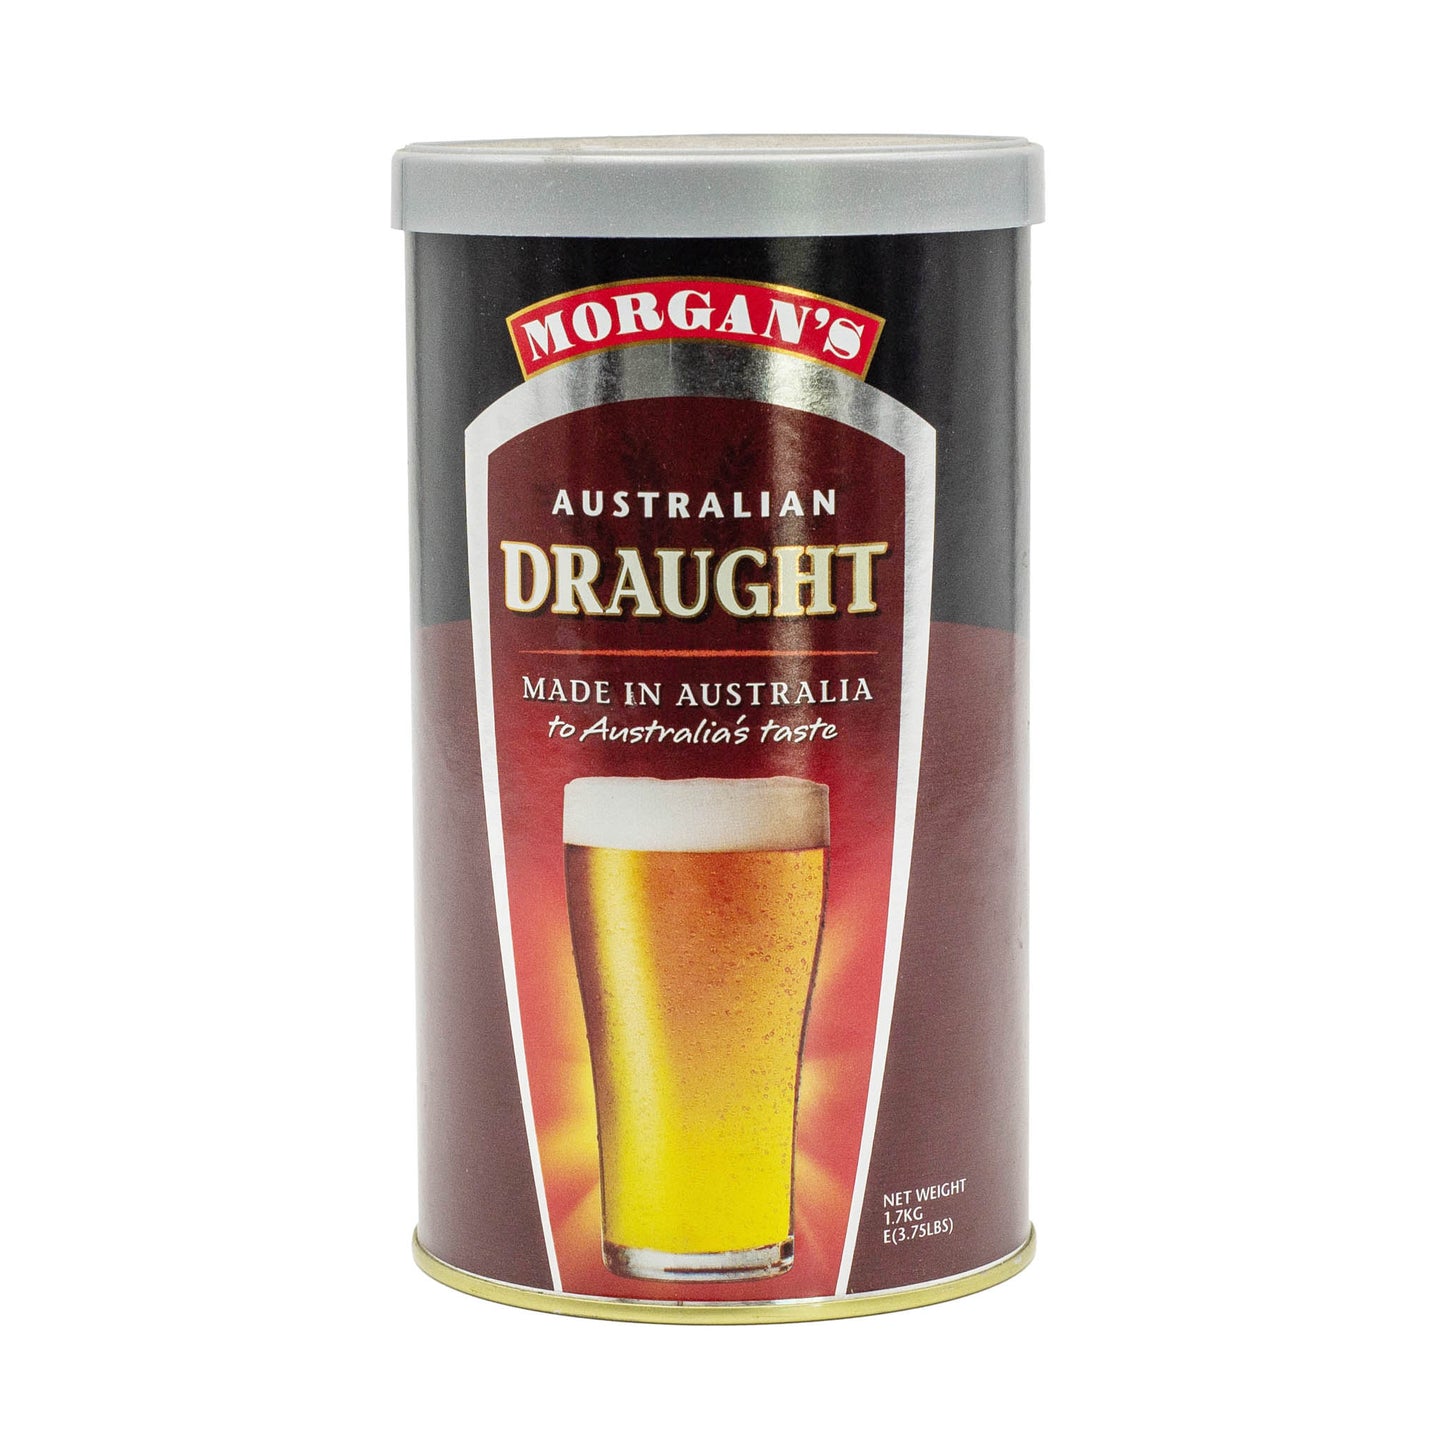 Morgans Australian Draught brew tin makes a full flavoured beer in a traditional draught style with a golden in colour and subtle head. 